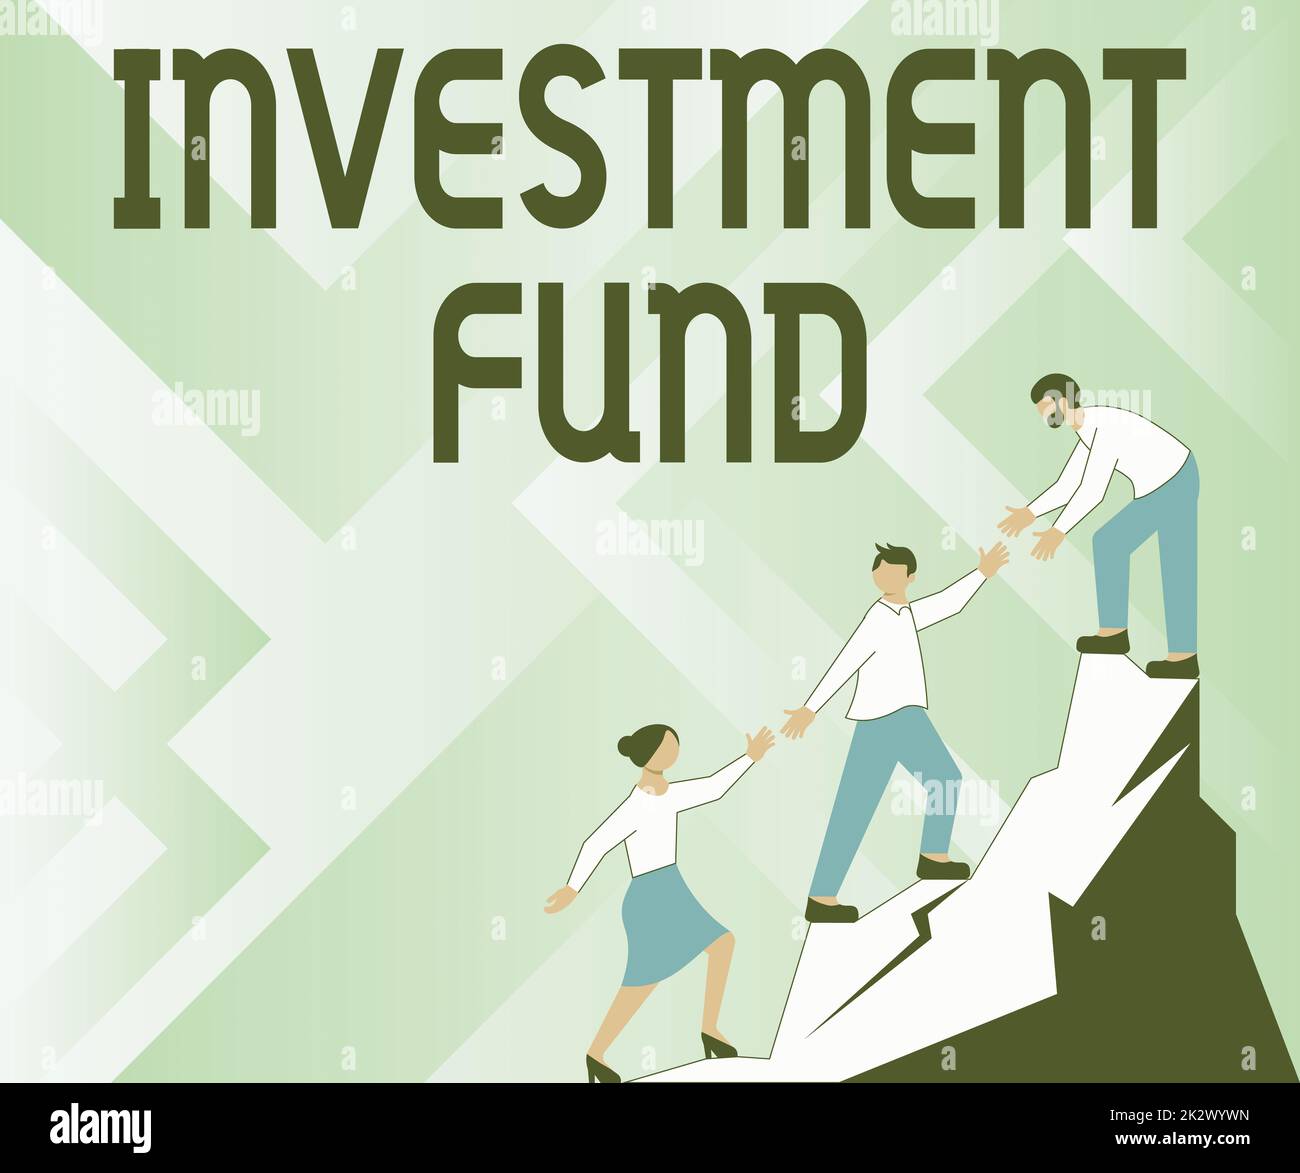 Writing displaying text Investment Fund, Word Written on A supply of capital belonging to numerous investors Colleagues Climbing Upwards Mountain Reac Stock Photo